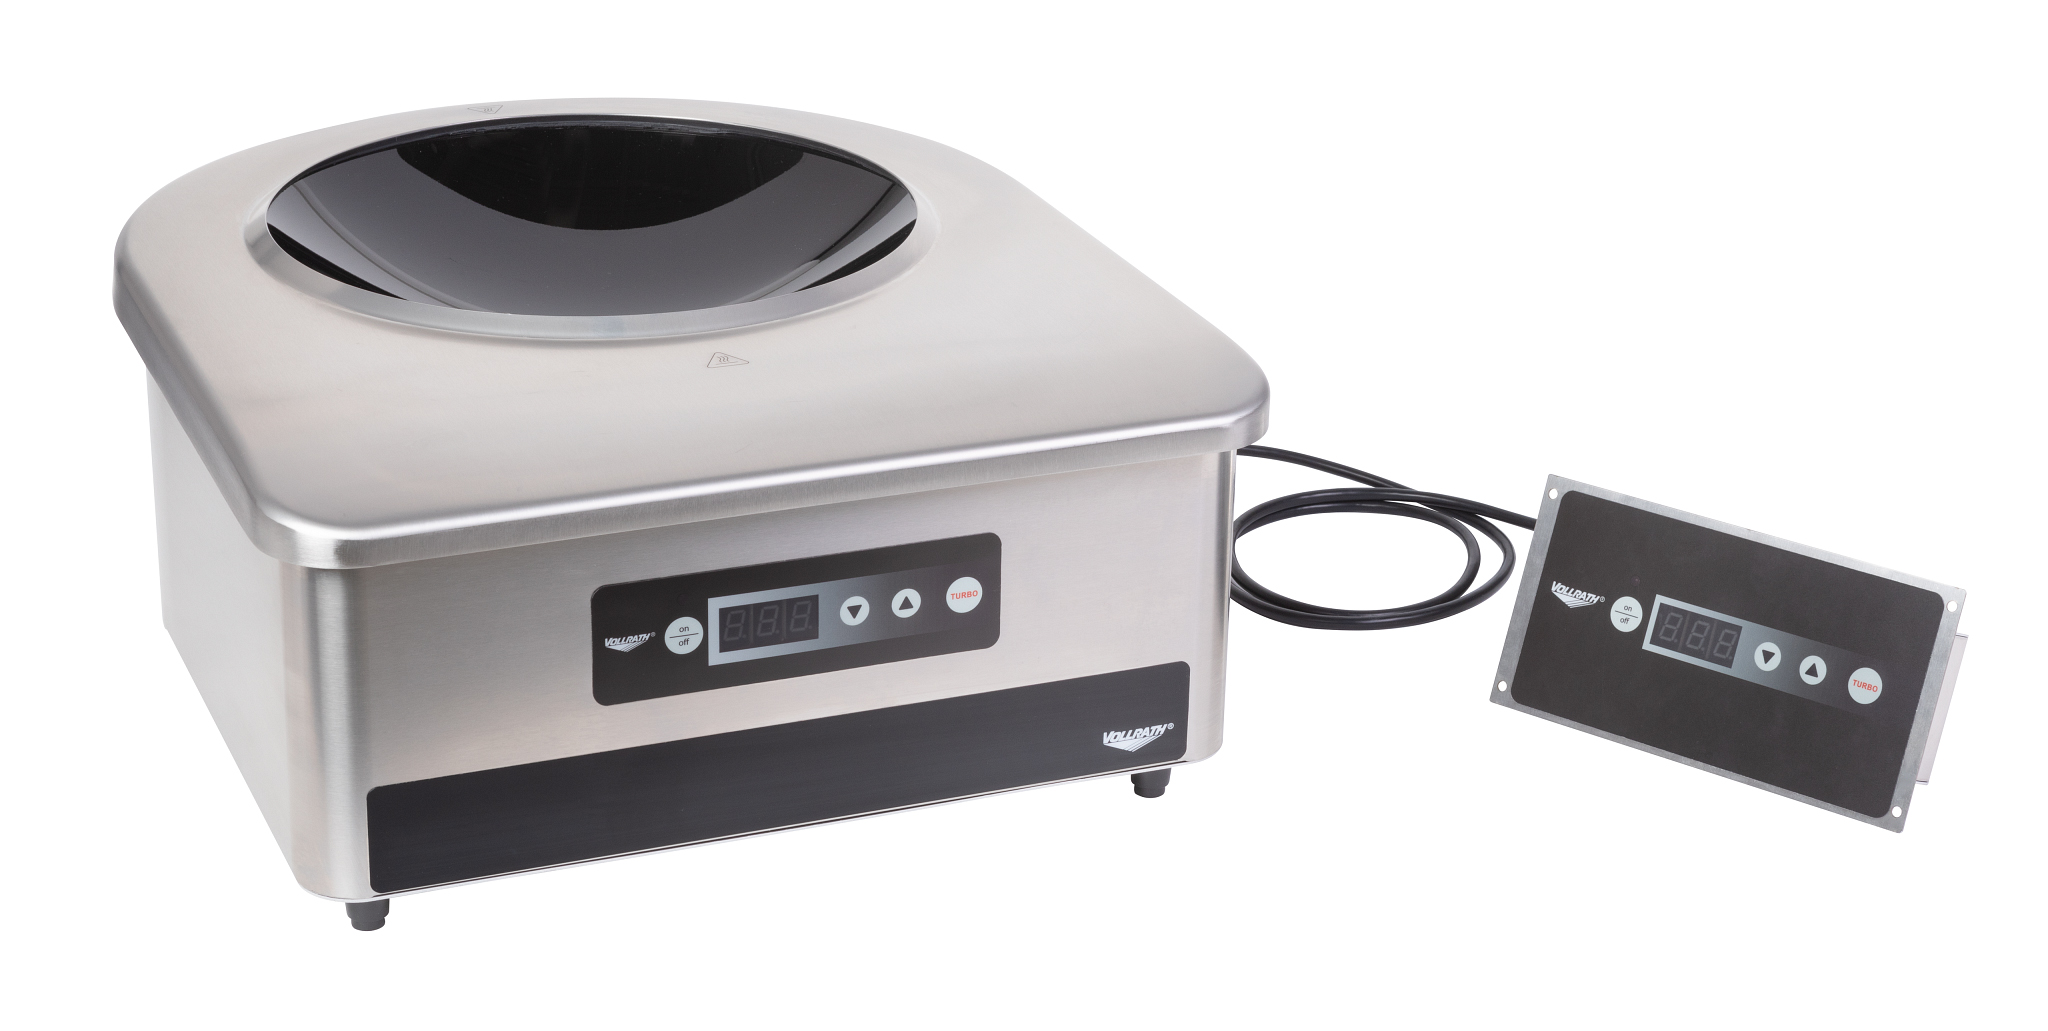 Vollrath induction wok with pan offers energy-saving stir fry all day long